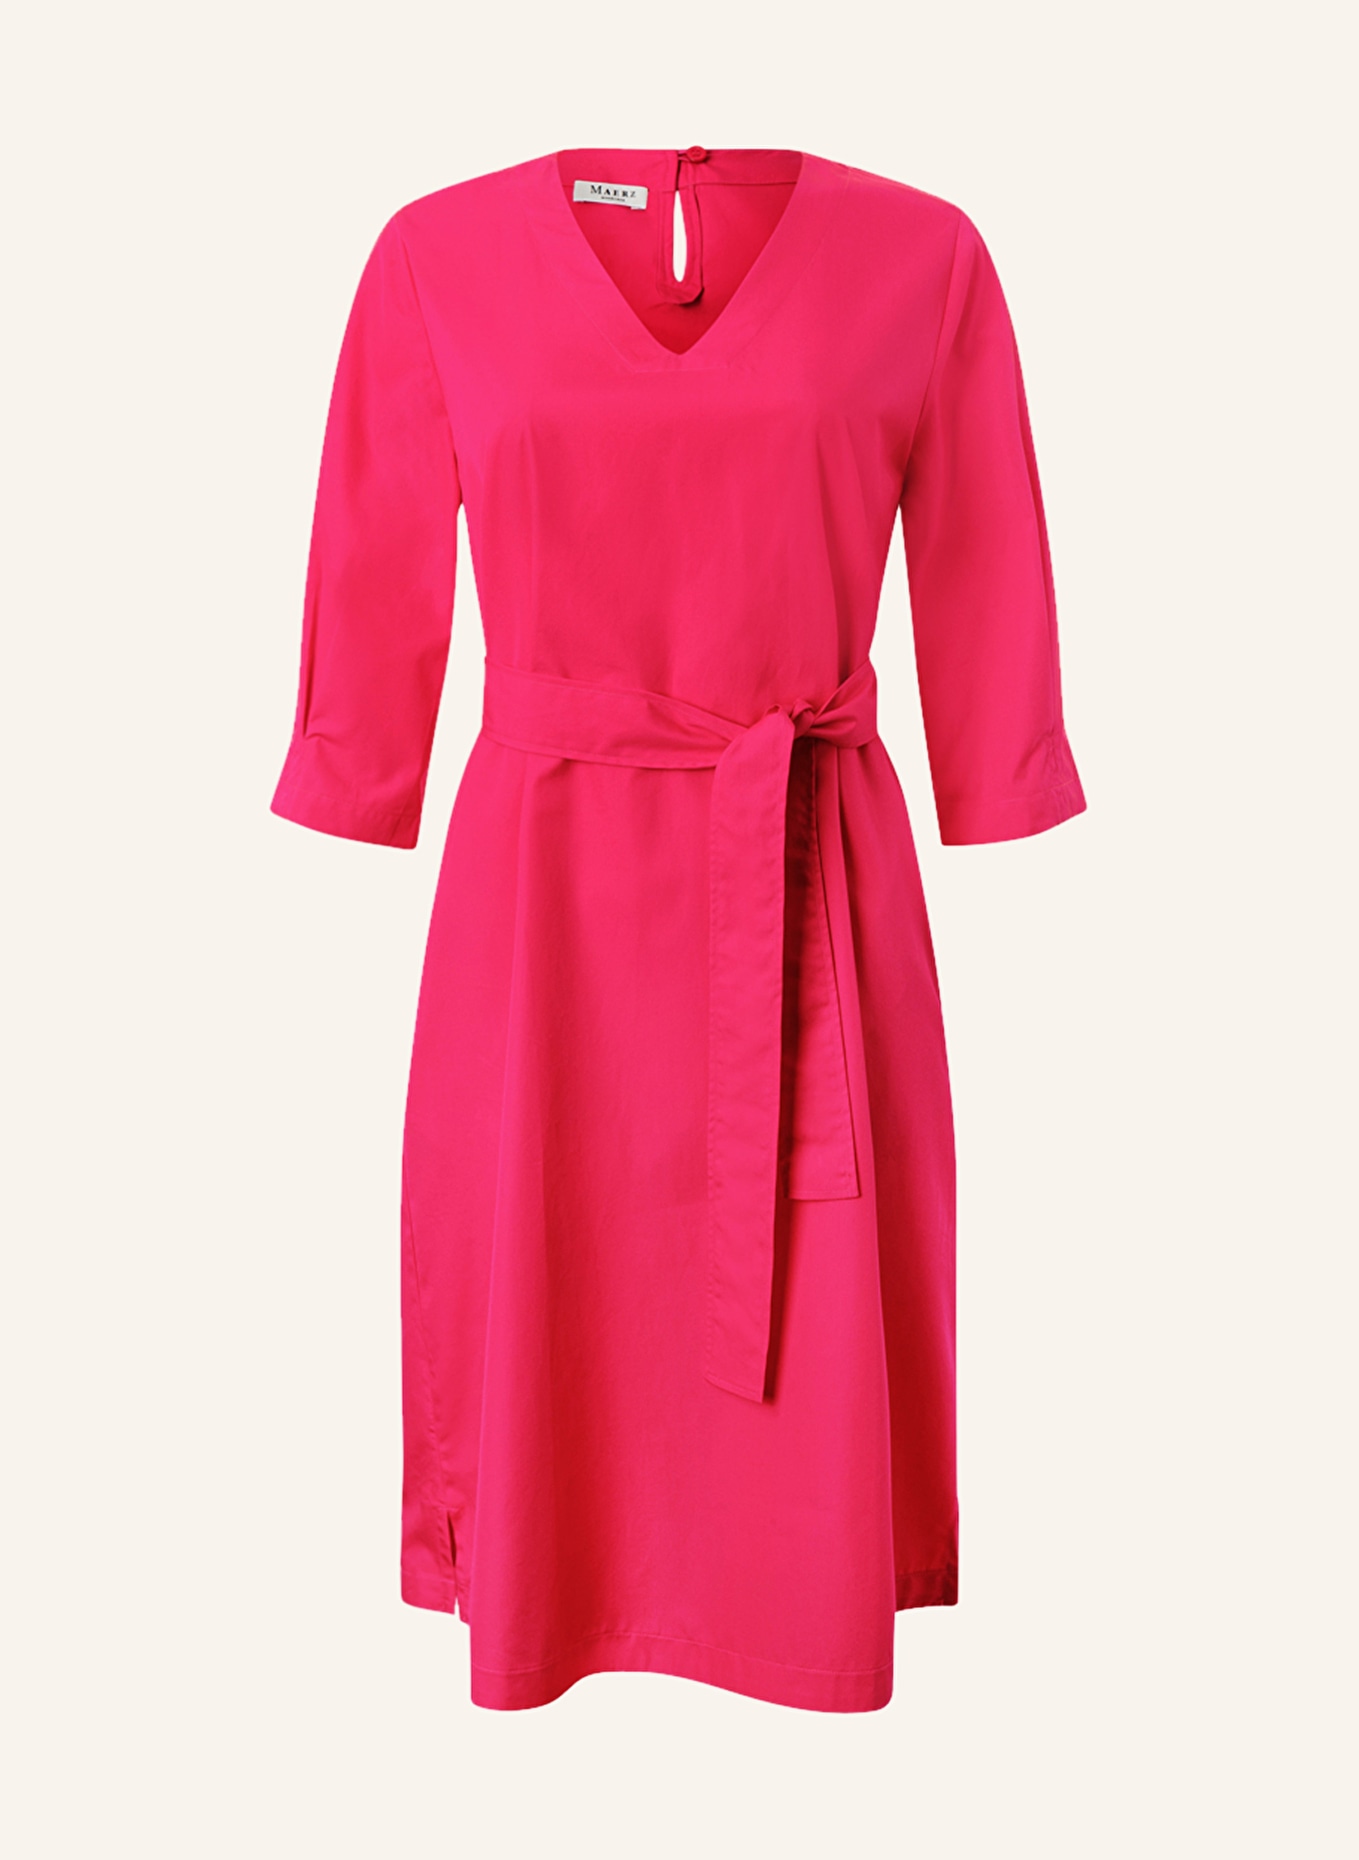 MAERZ MUENCHEN Dress with 3/4 sleeves, Color: PINK (Image 1)